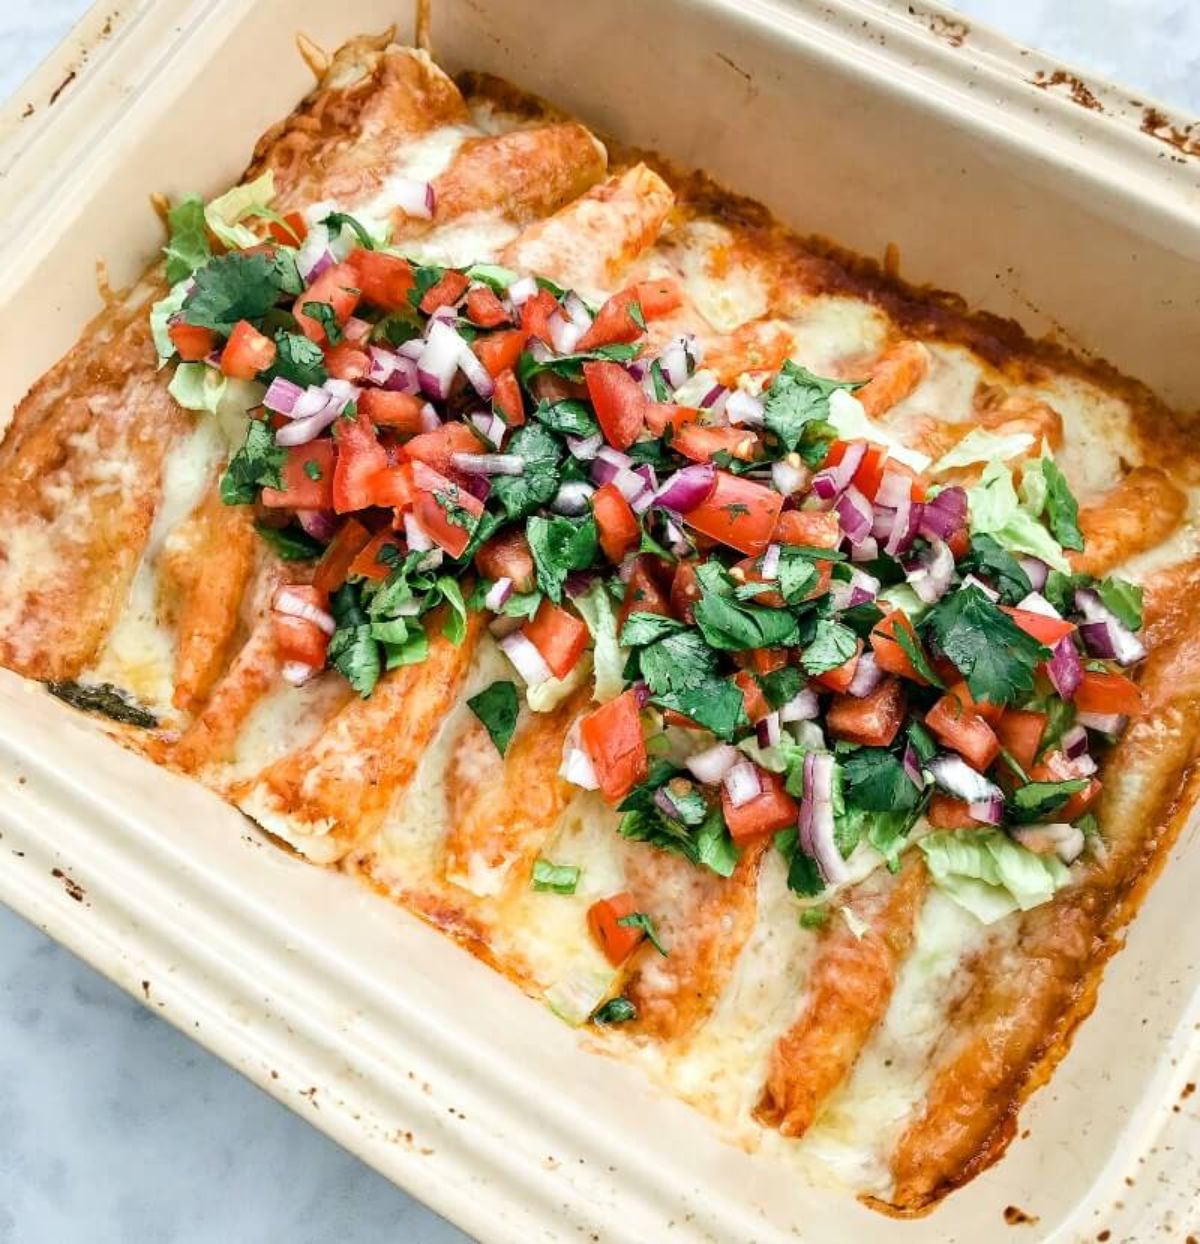 An oven dish filled with enchiladas topped with chopped fresh tomatoes, red onion, cucumber and herbs